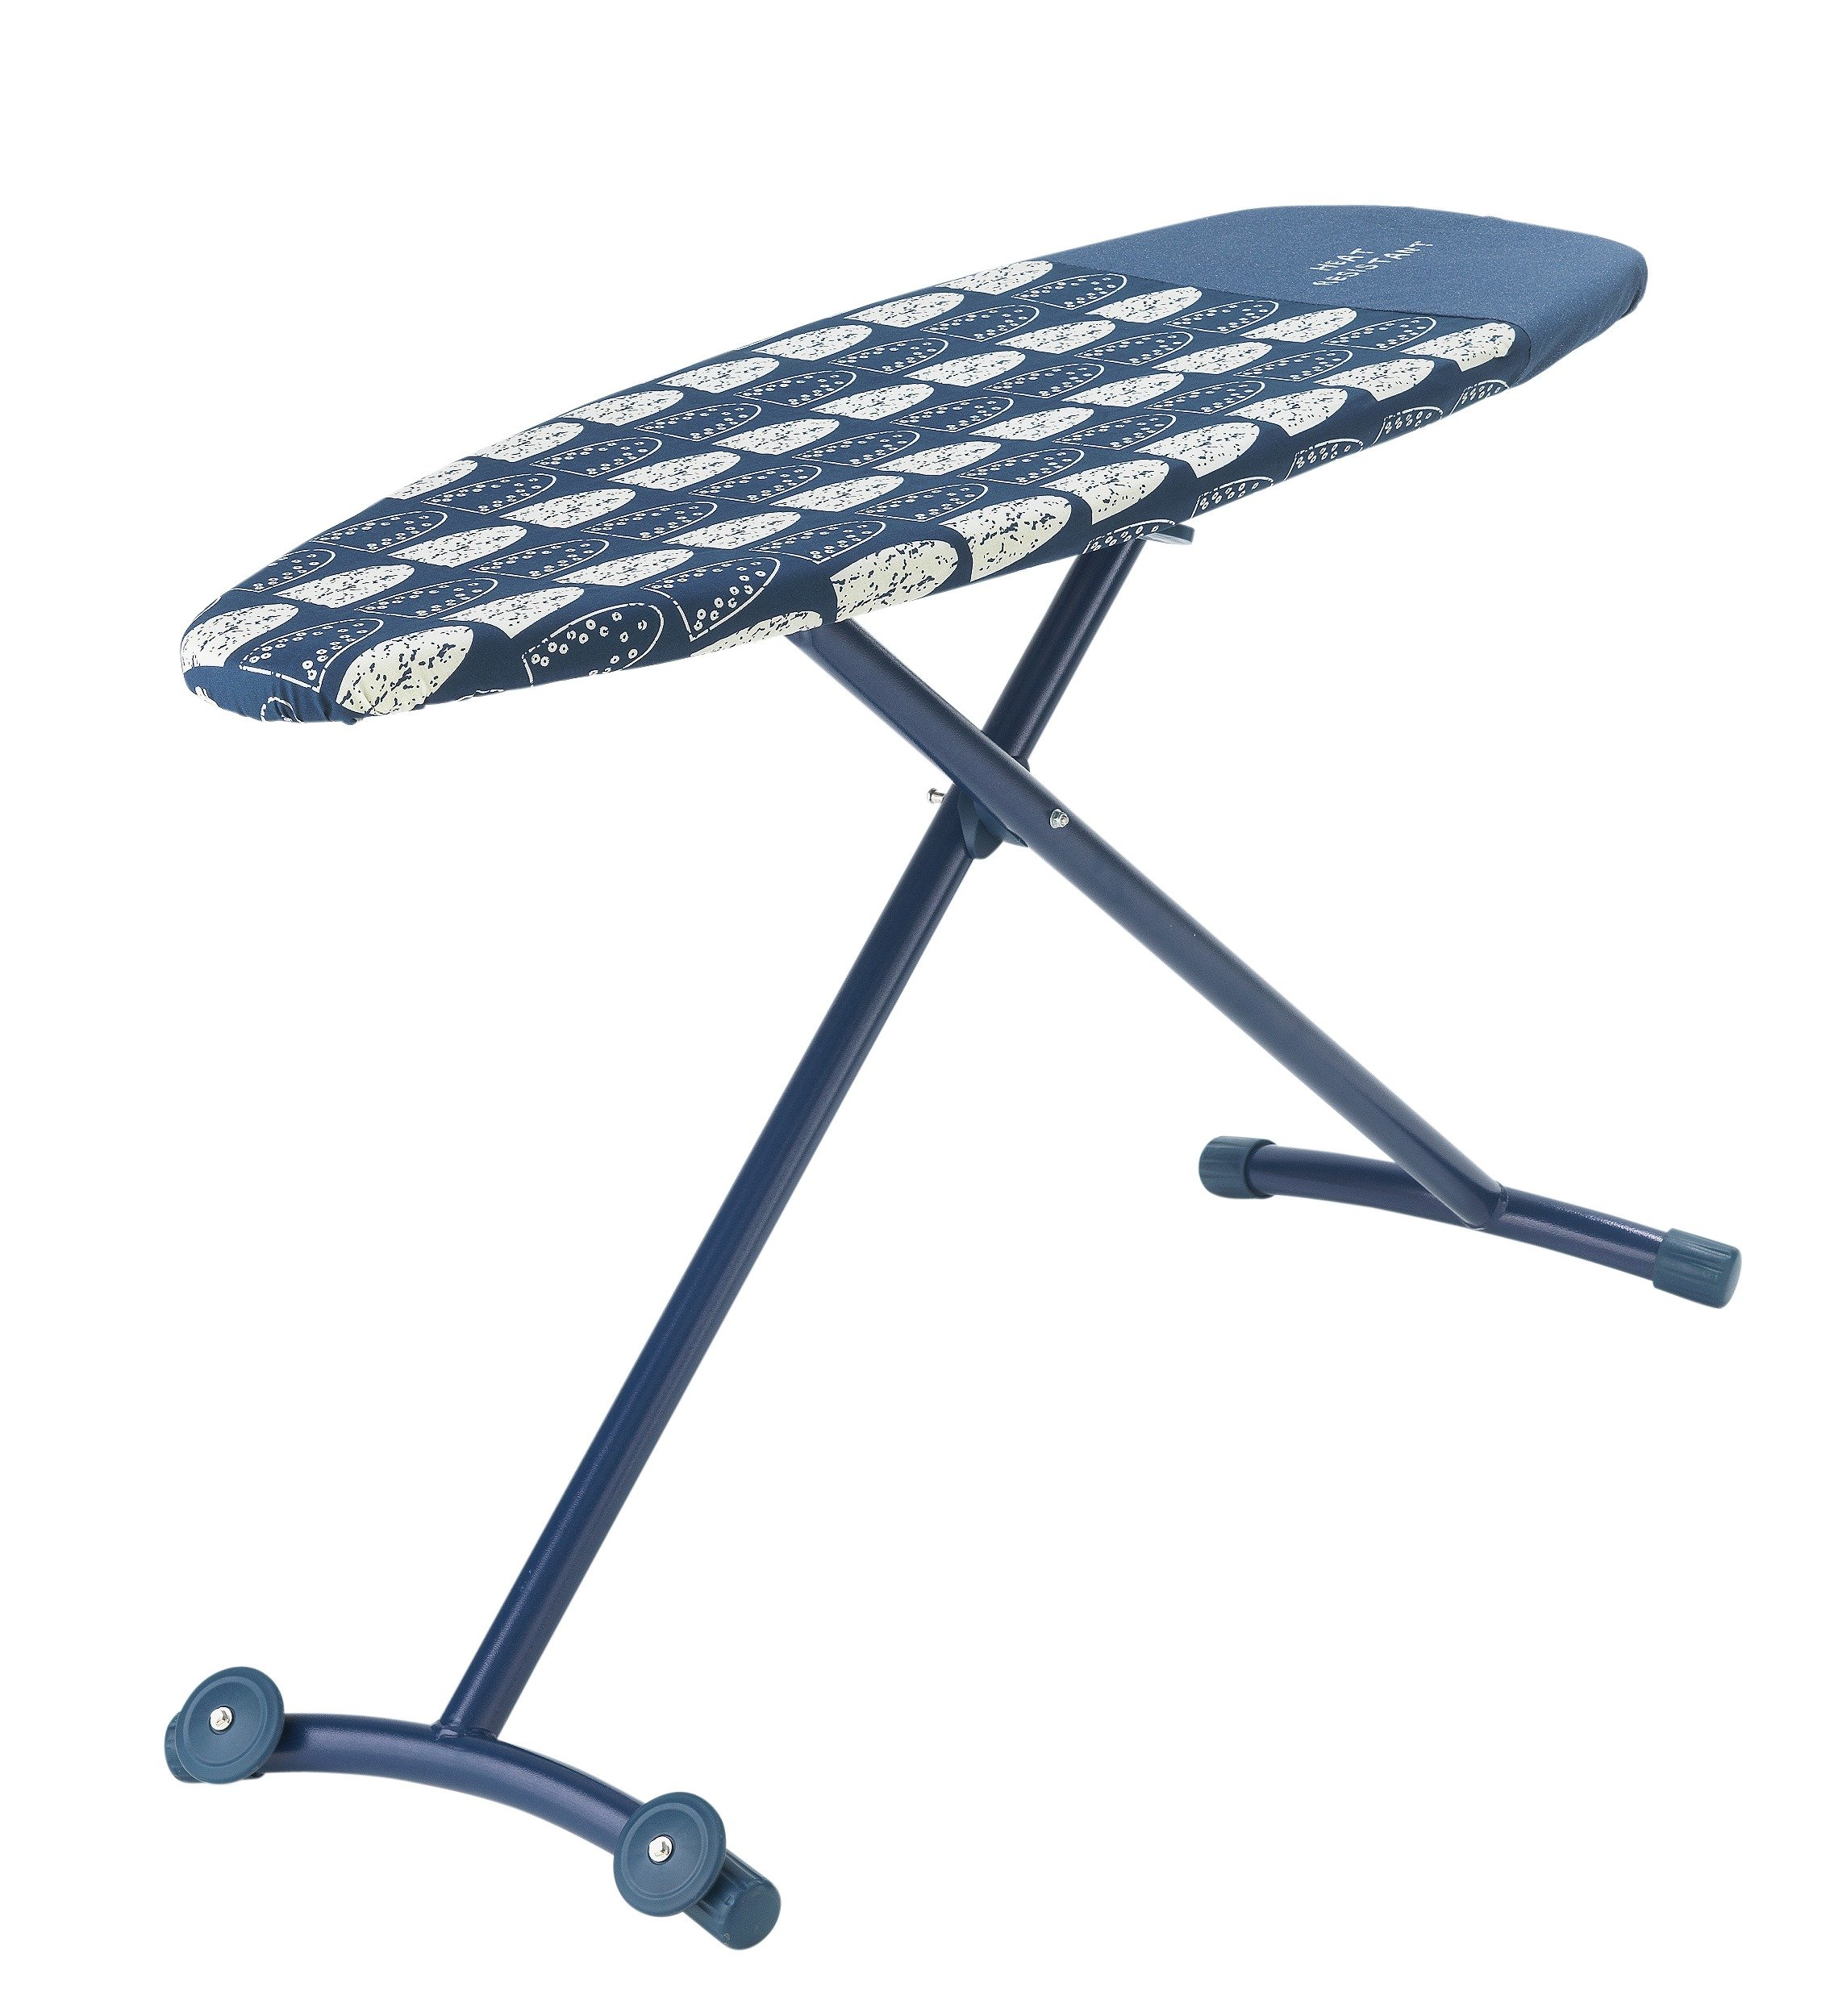 Addis Deluxe 135 x 46cm Ironing Board Review